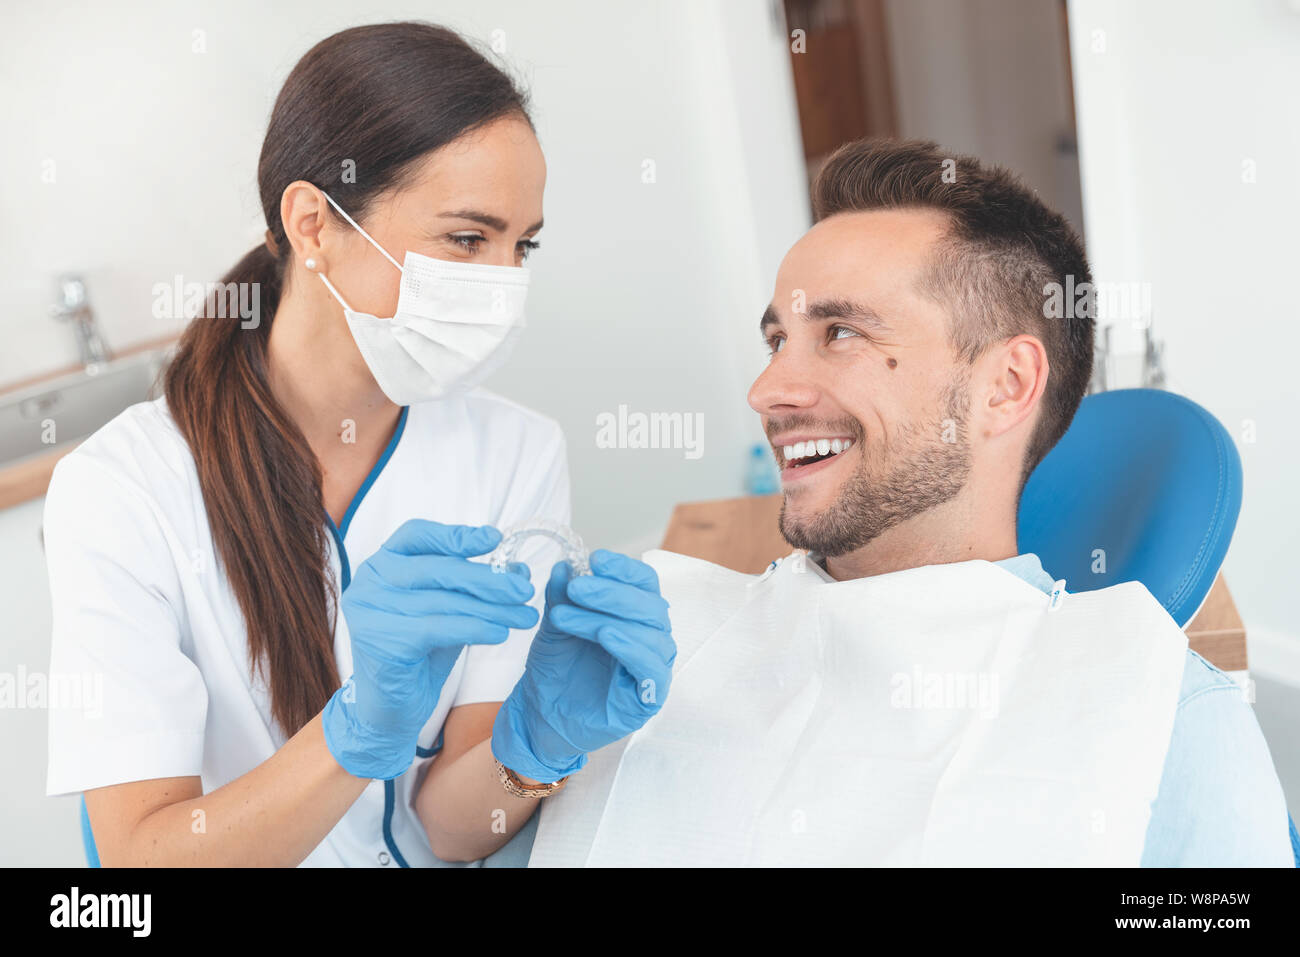 Dentist shows invisible braces aligner. Dental consultation in an orthodontic clinic Stock Photo